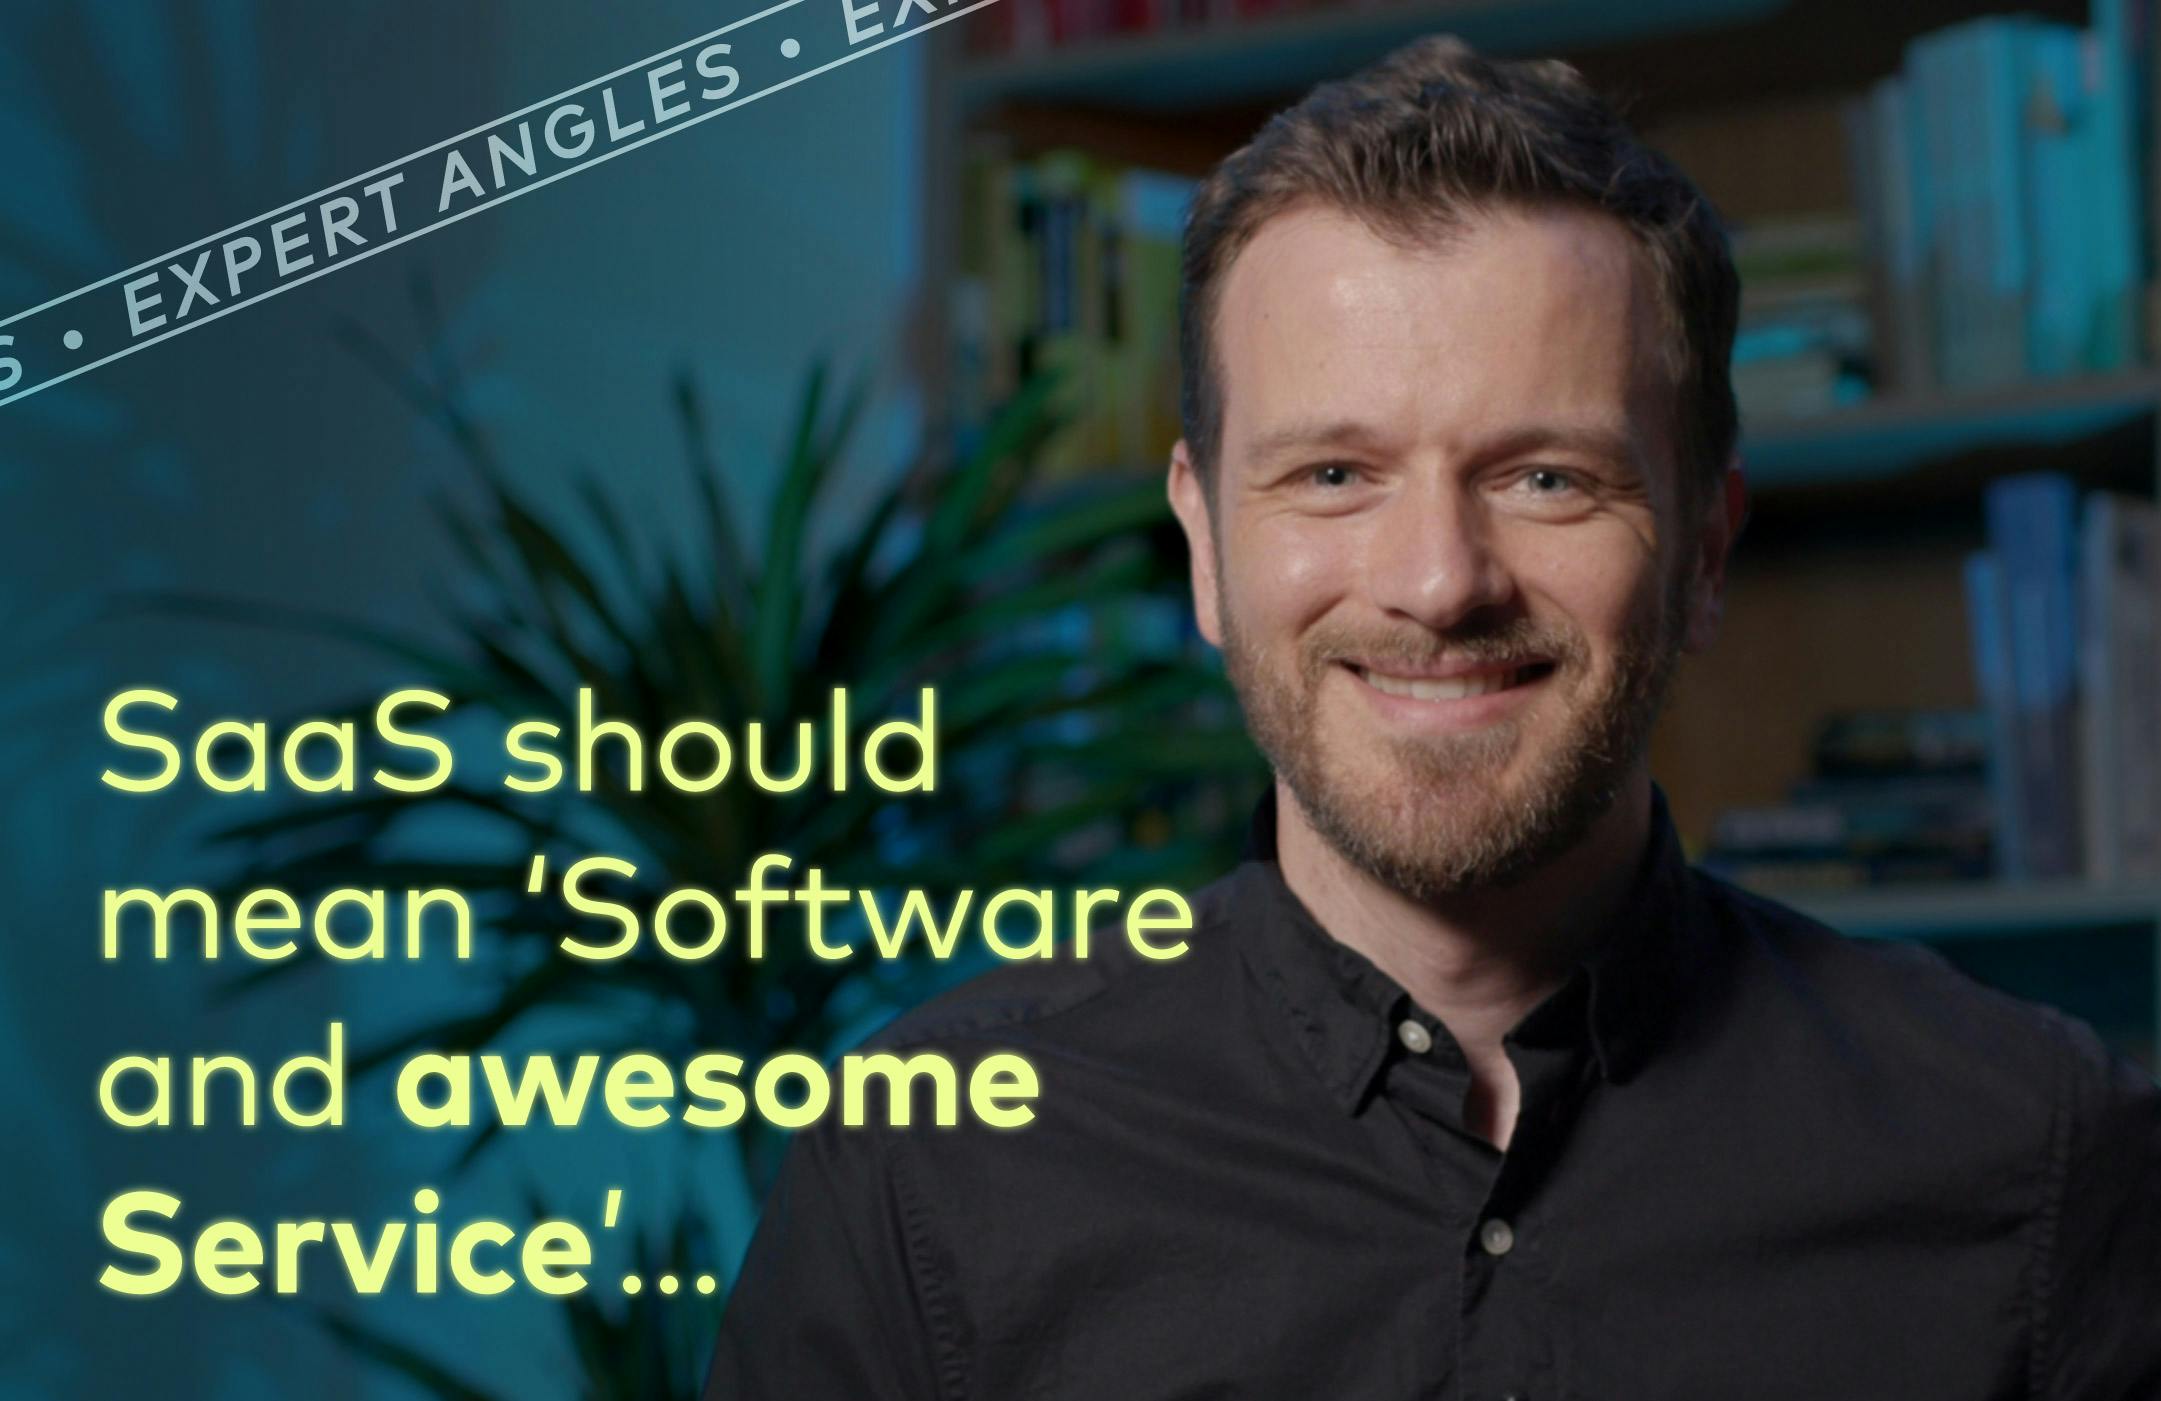 SaaS should mean 'Software and awesome Service'...